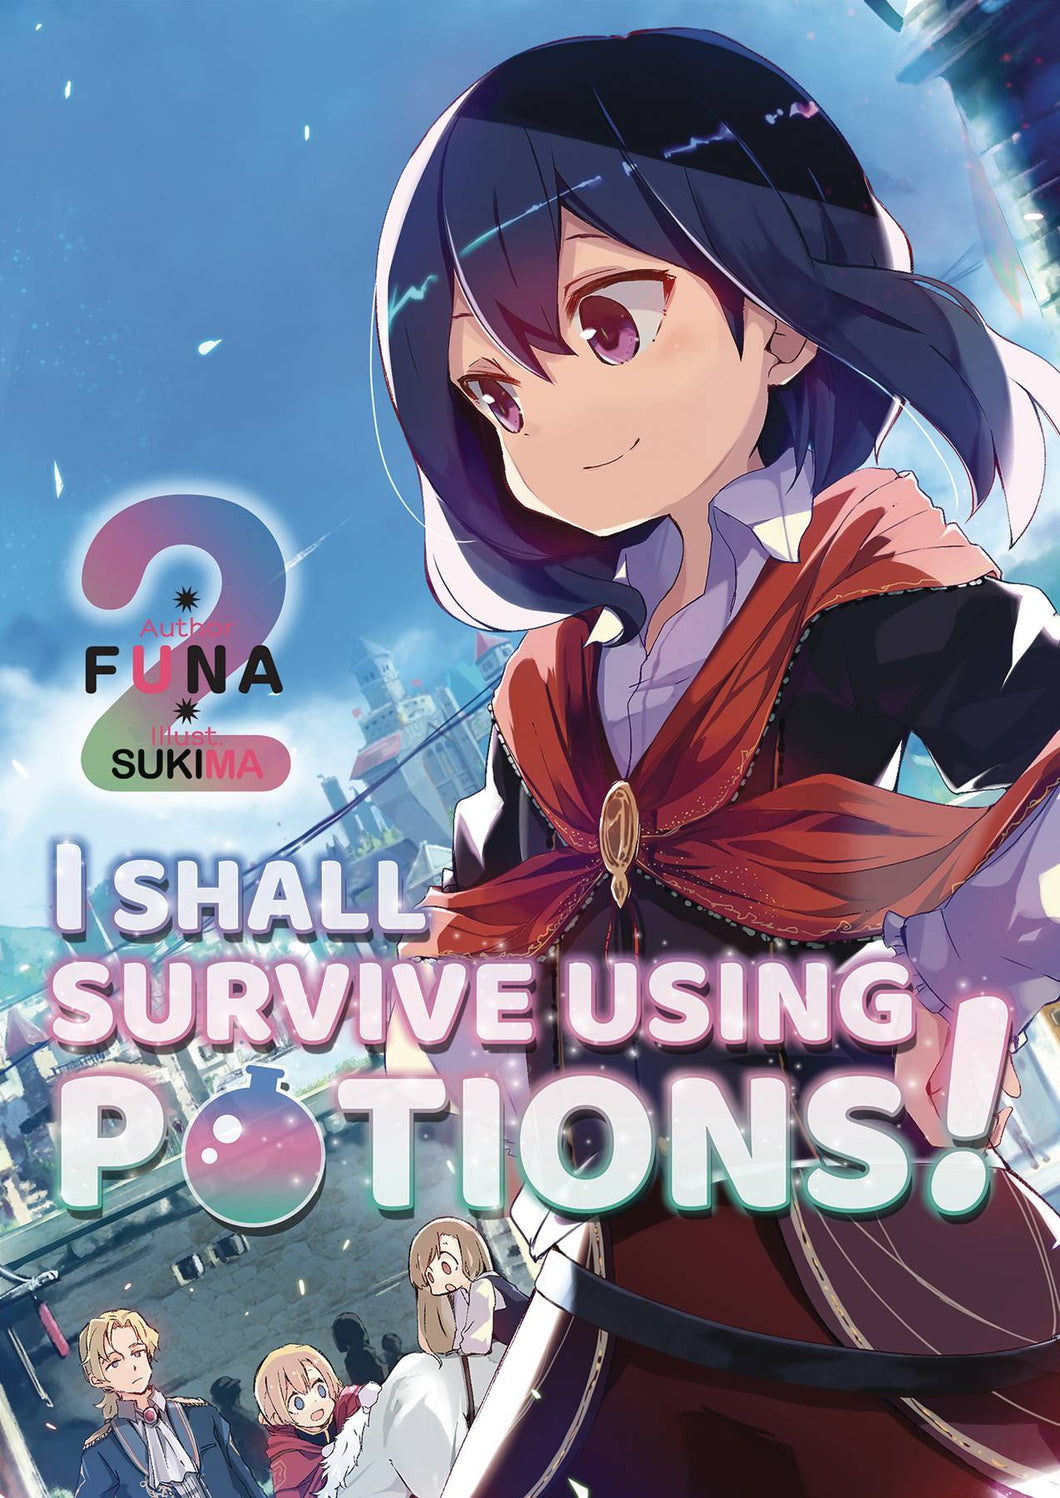 I Shall Survive Using Potions GN - Books